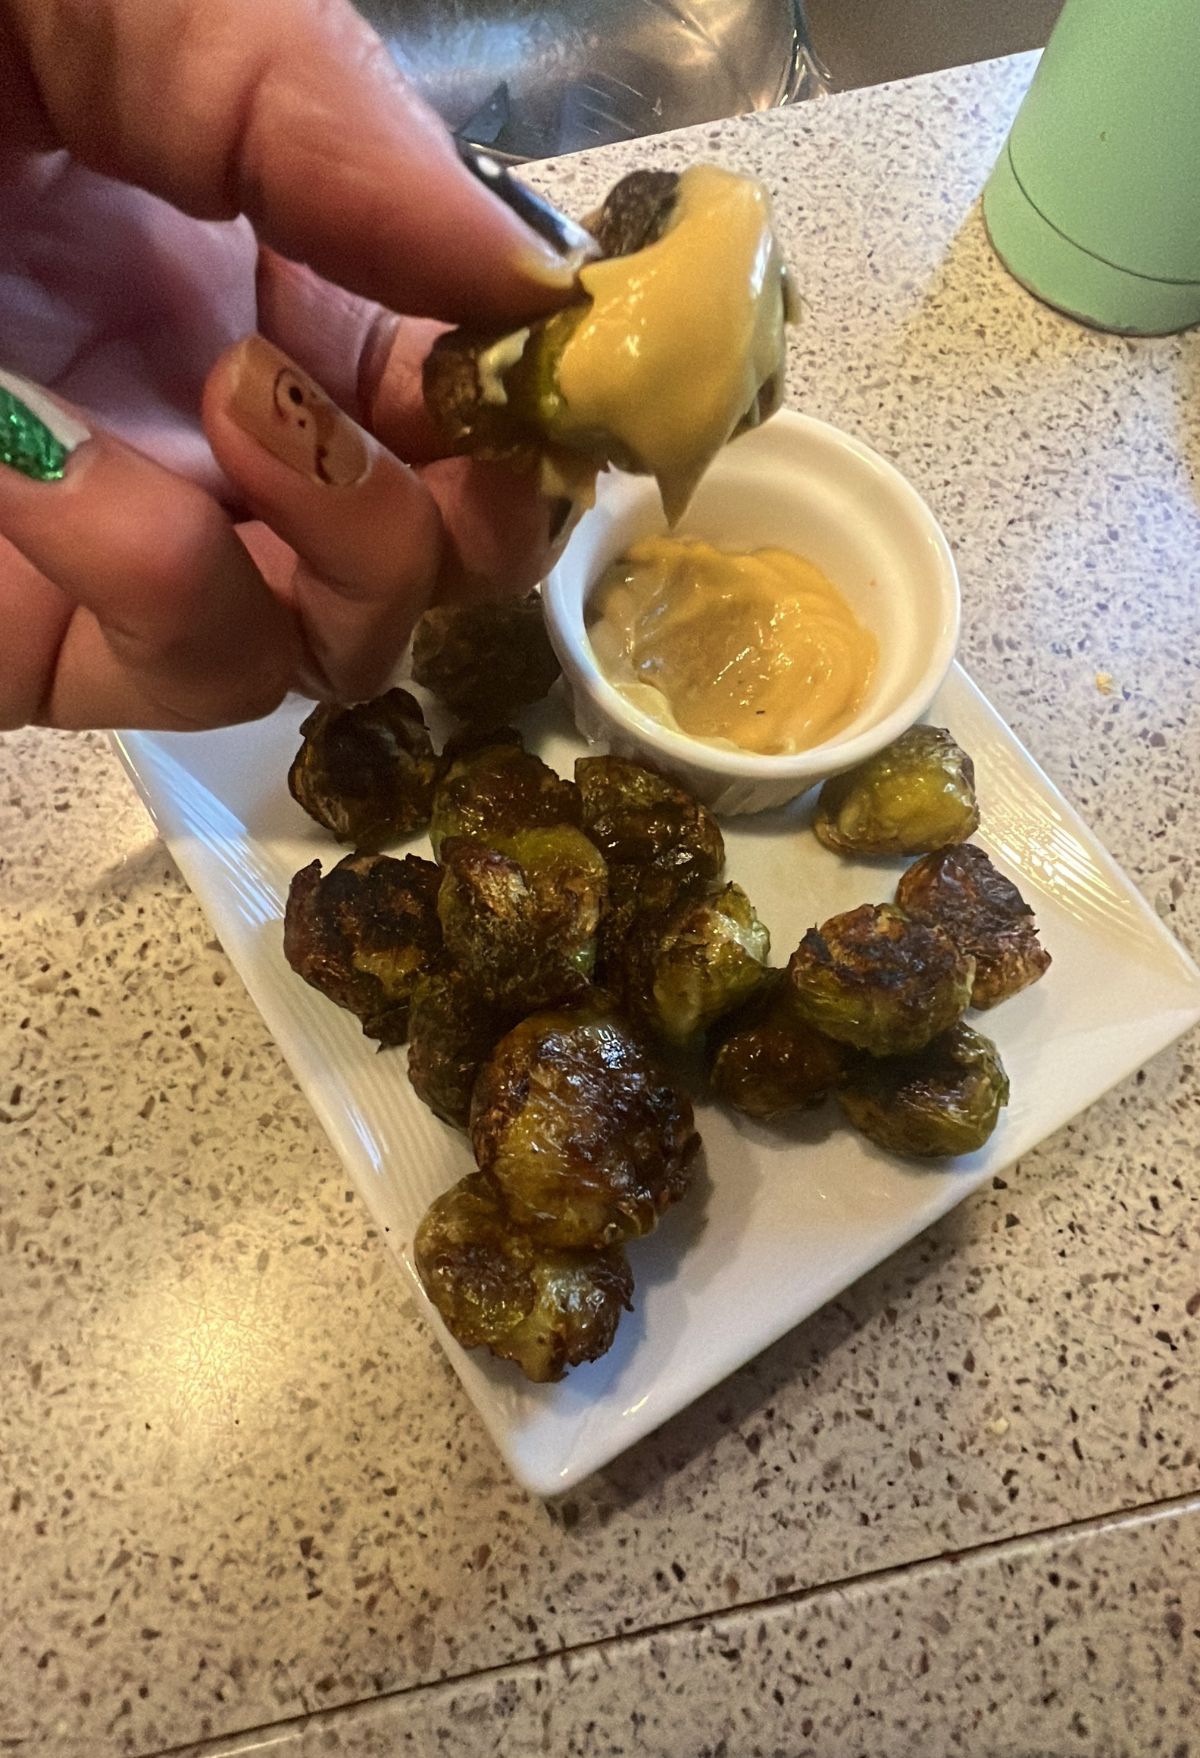 A person is dipping brussels sprouts into a sauce.